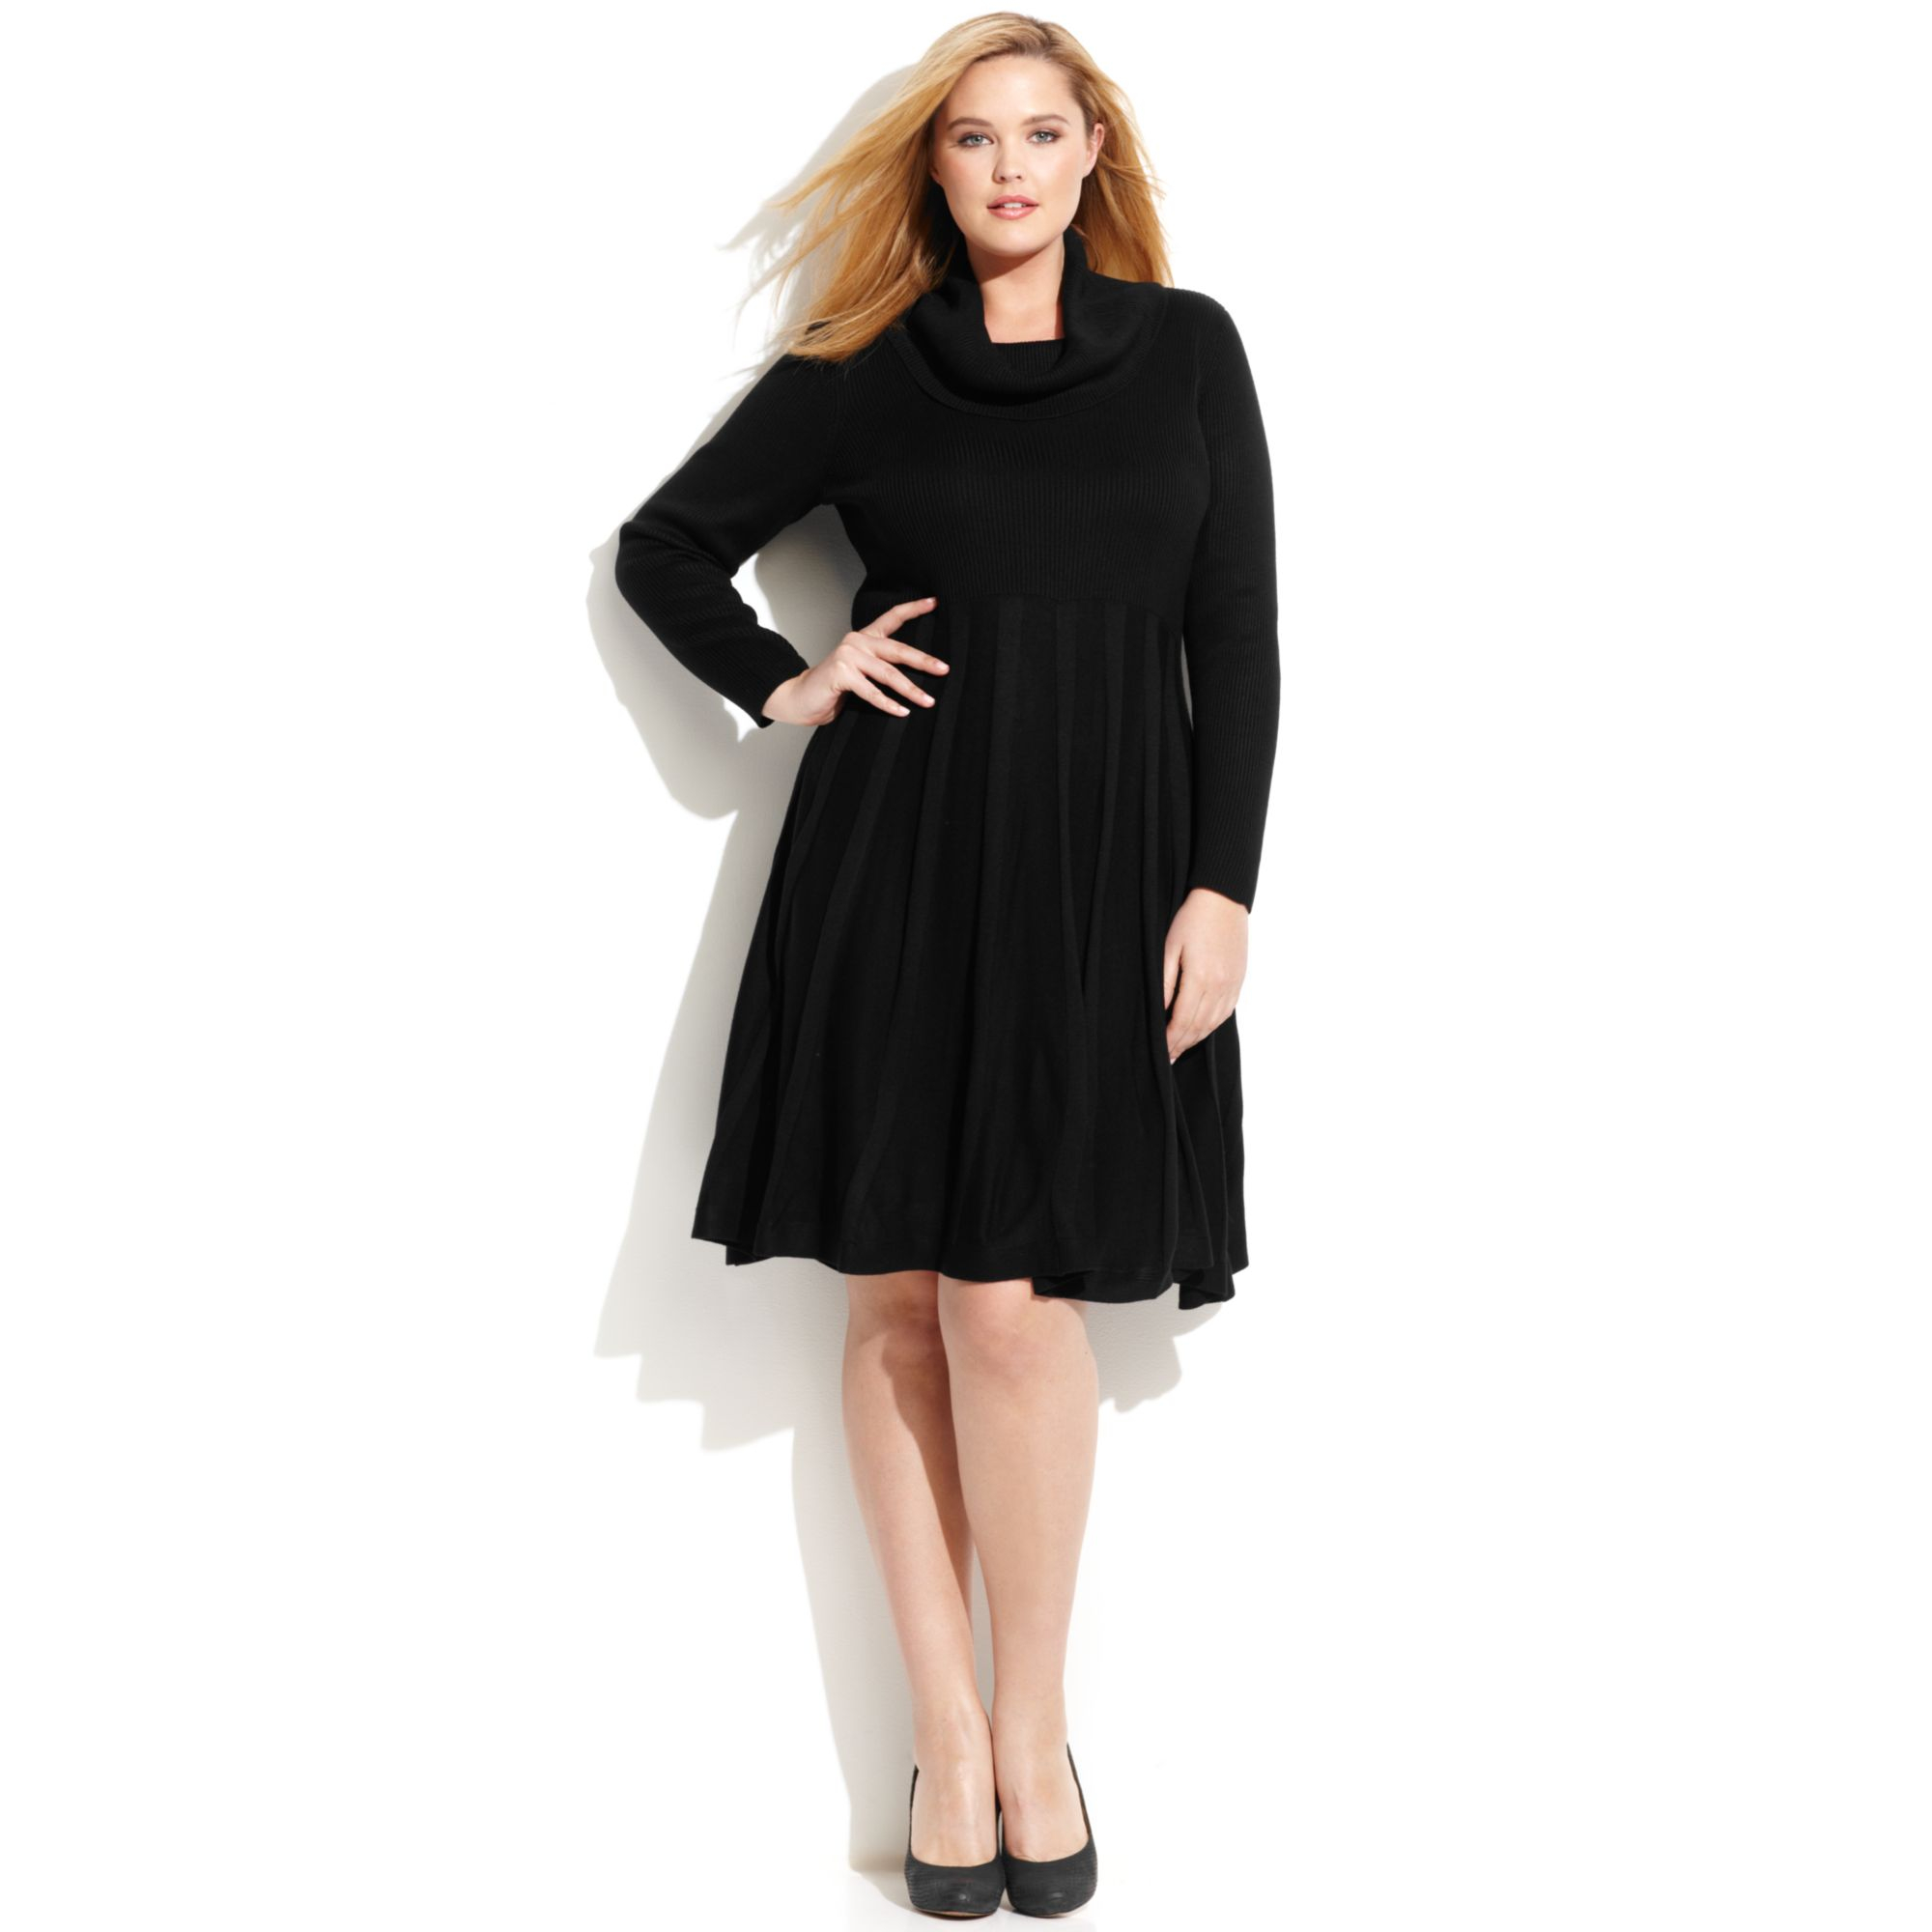 India plus size sweater dresses with cowl neck